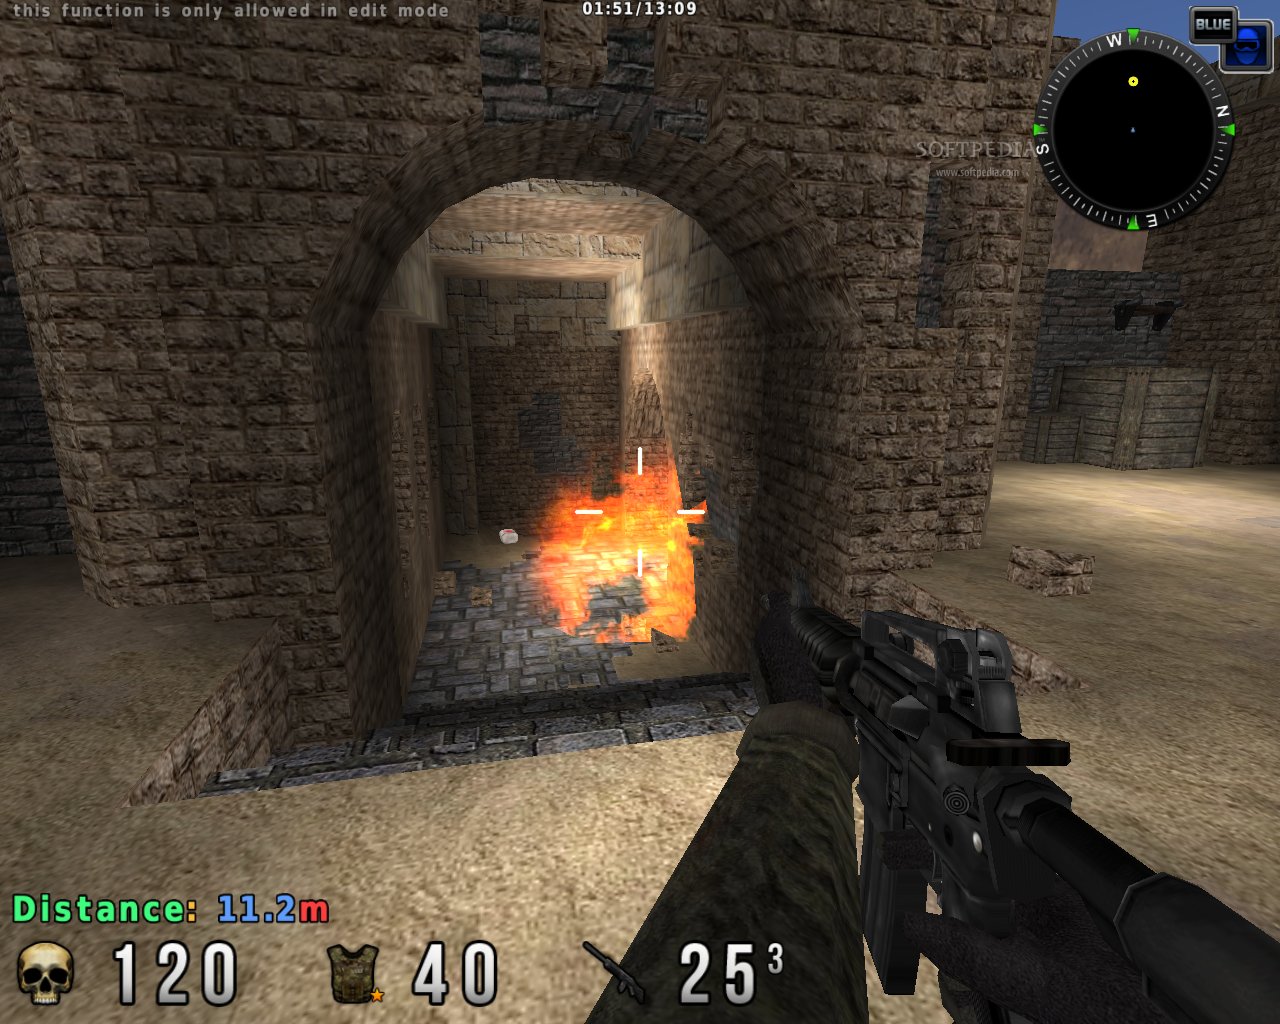 assaultcube reloaded free download